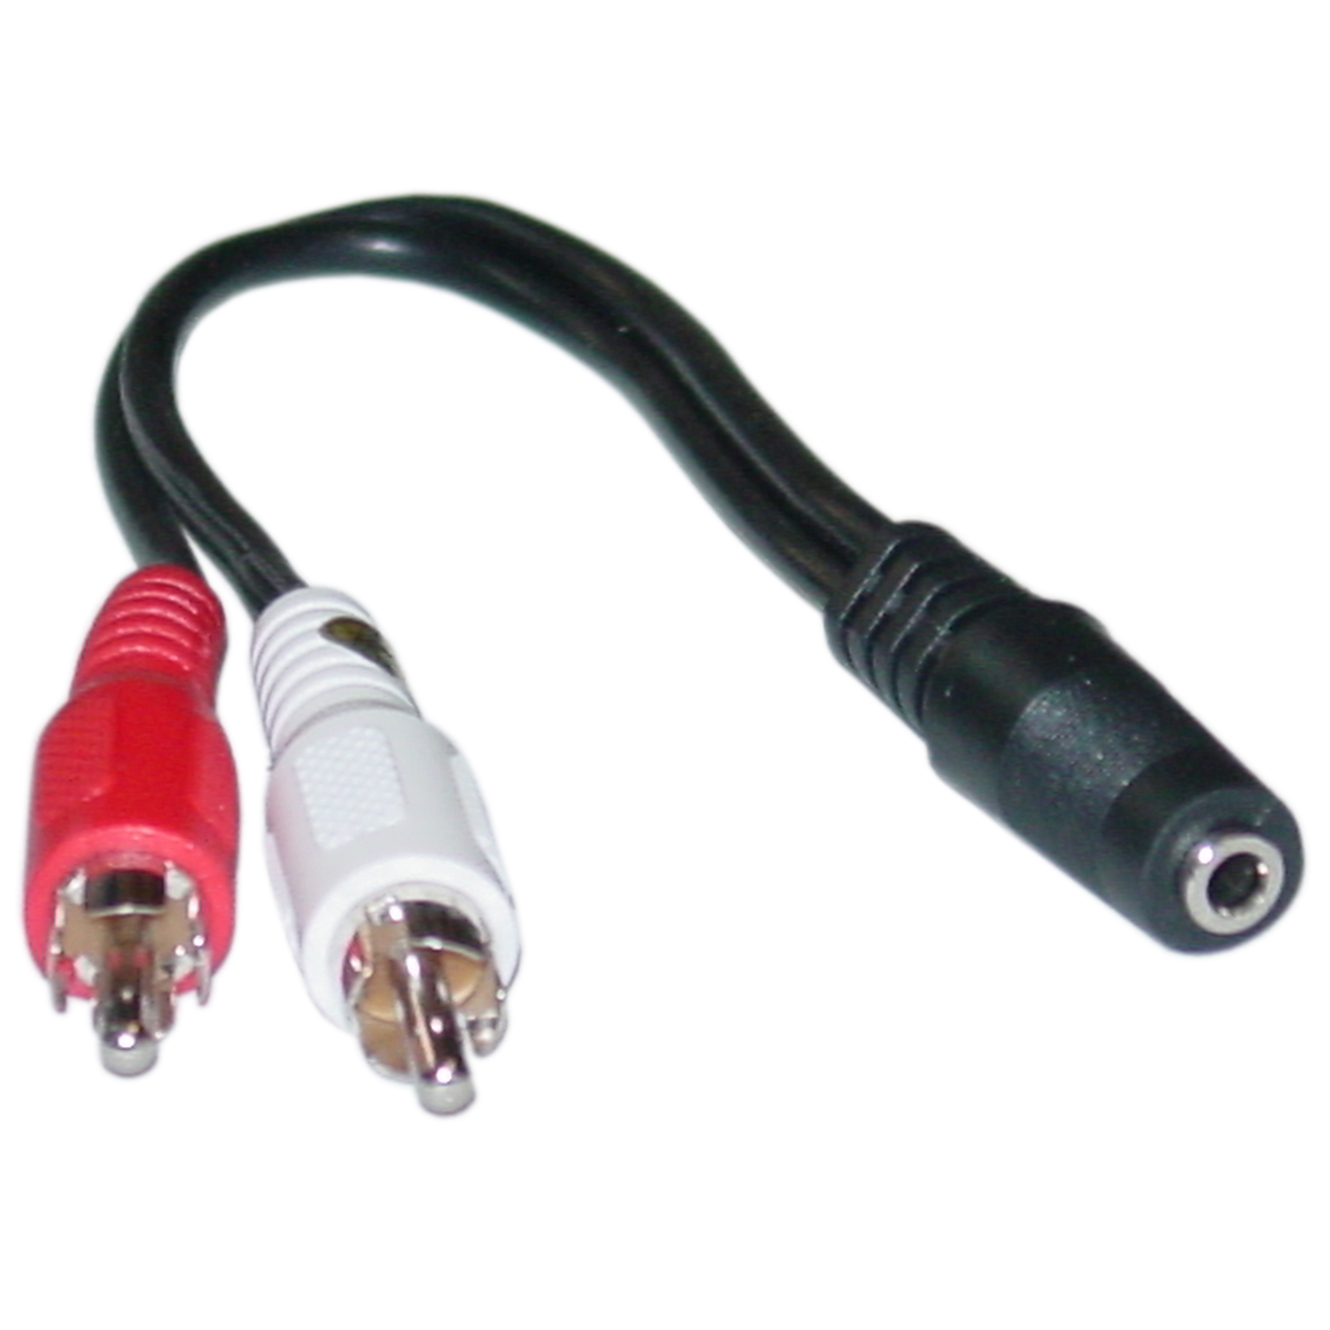 AWG 1-Feet Speaker wire with RCA Male Black Adapter